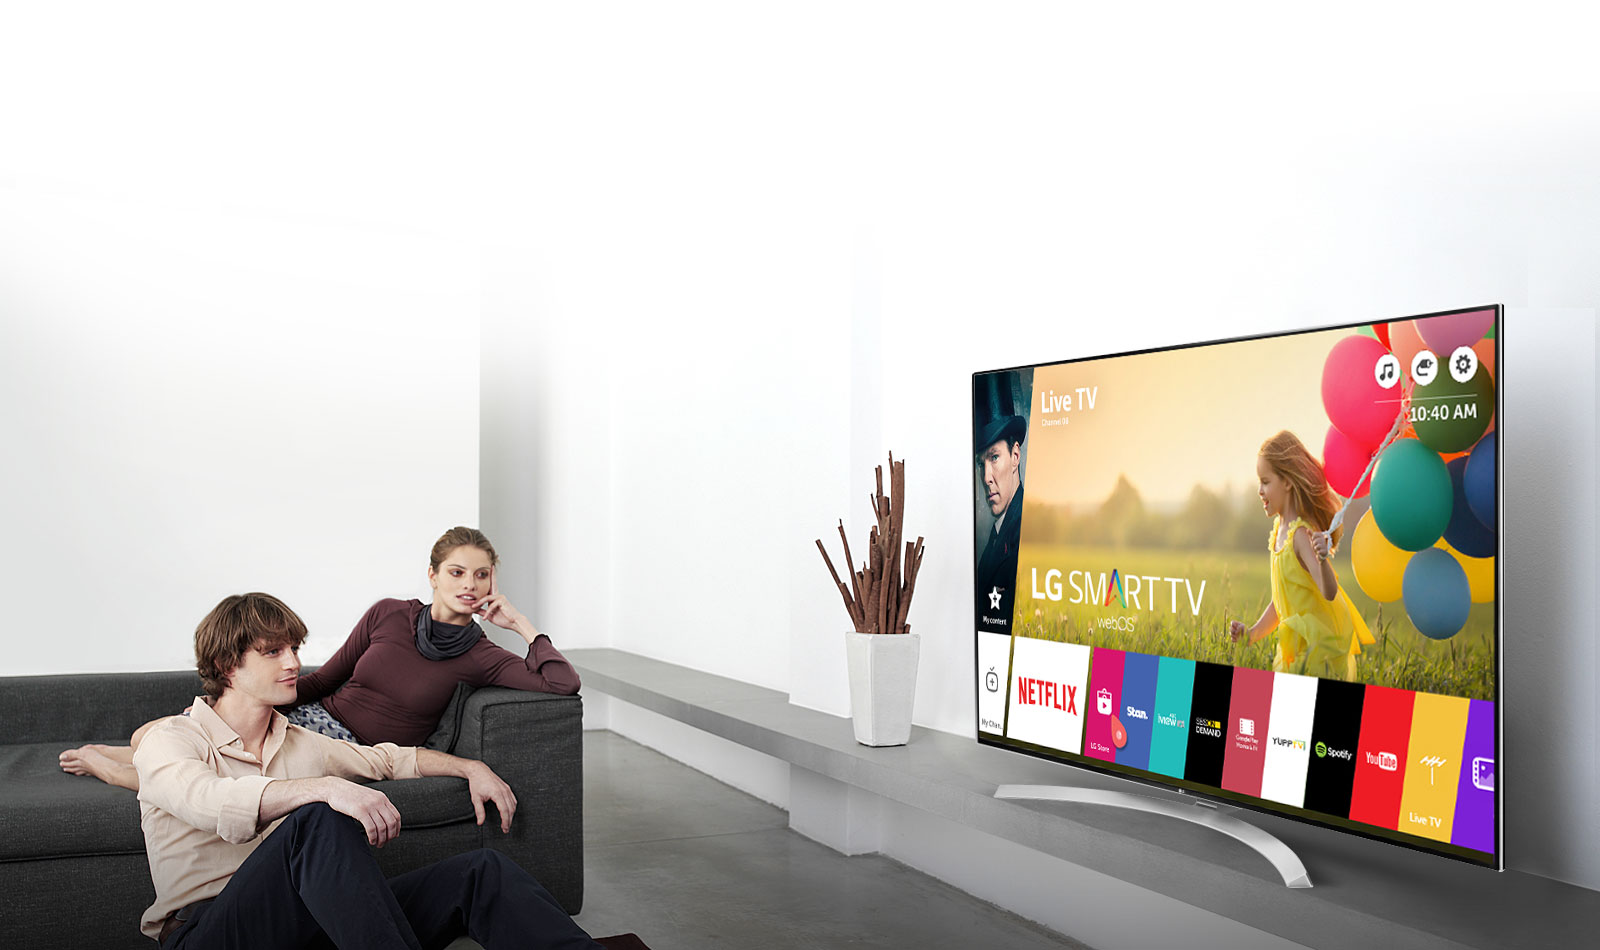 Targeted advertising will appear on LG TVs: the company will collect data about its users